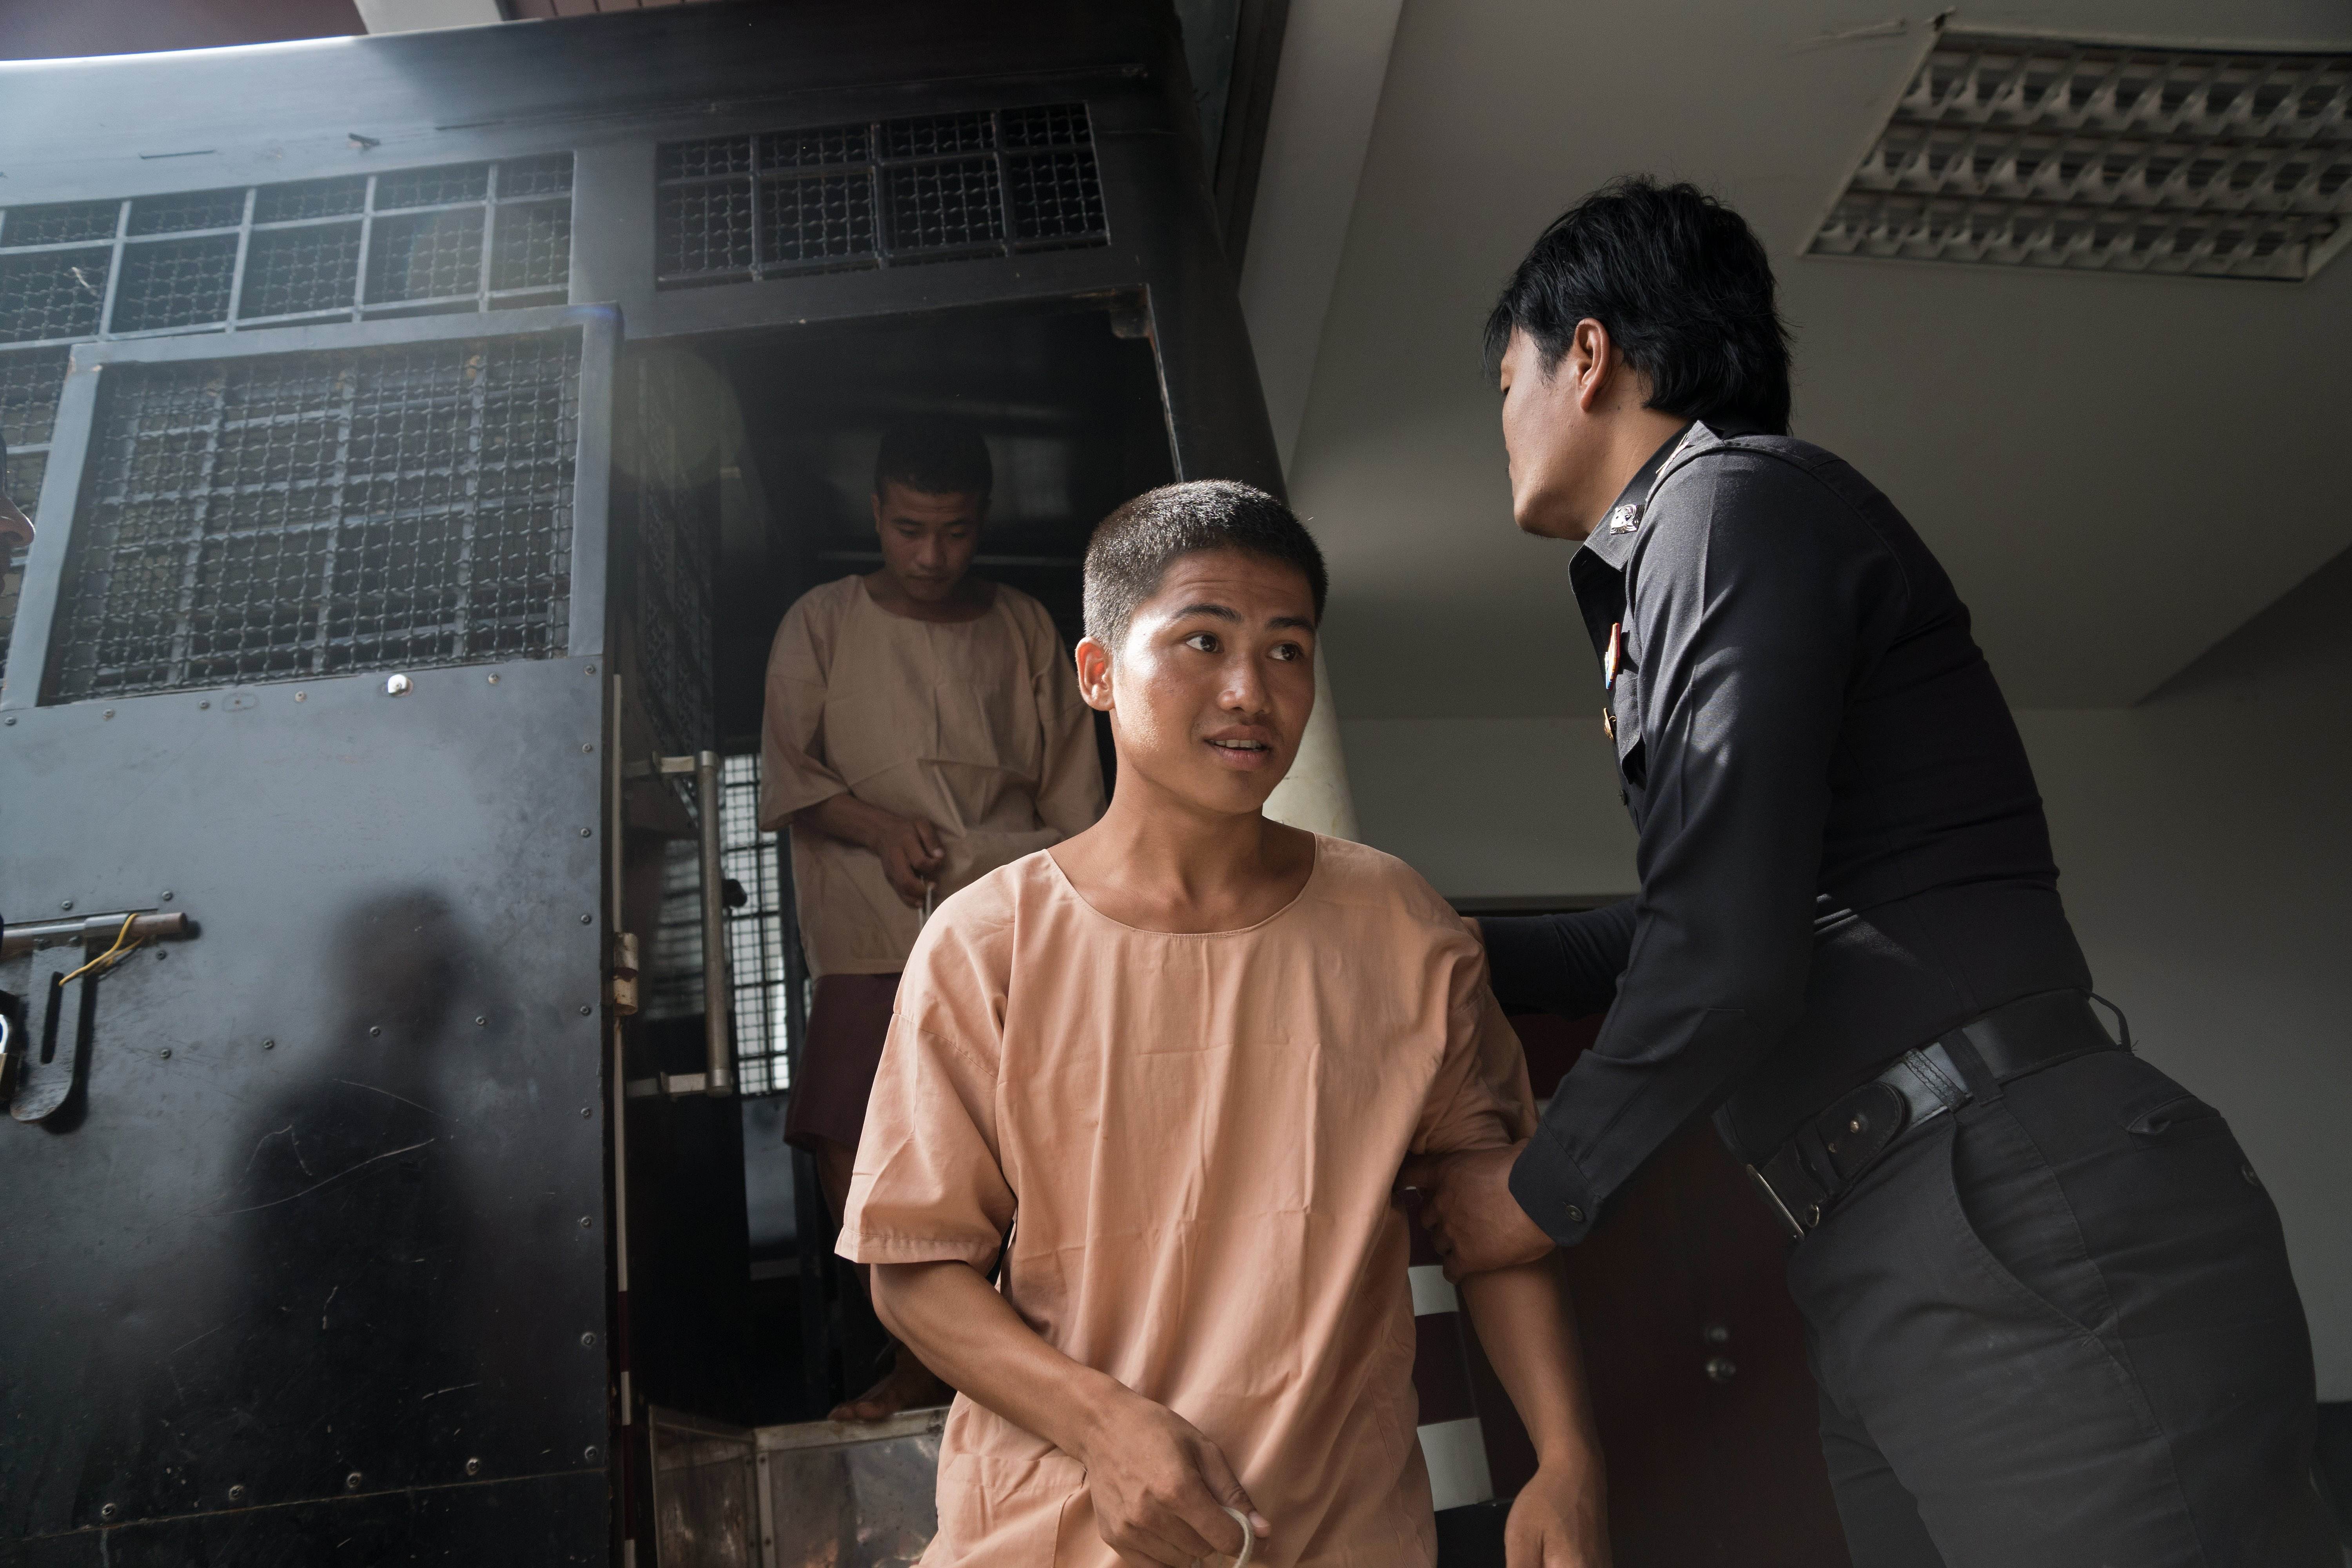 Myanmar nationals Win Zaw Htun (front) and Zaw Lin emerge from a prison van as they arrive at court for the start of their trial in Koh Samui for allegedly murdering Britons David Miller and  Hannah Witheridge. Photo: AFP